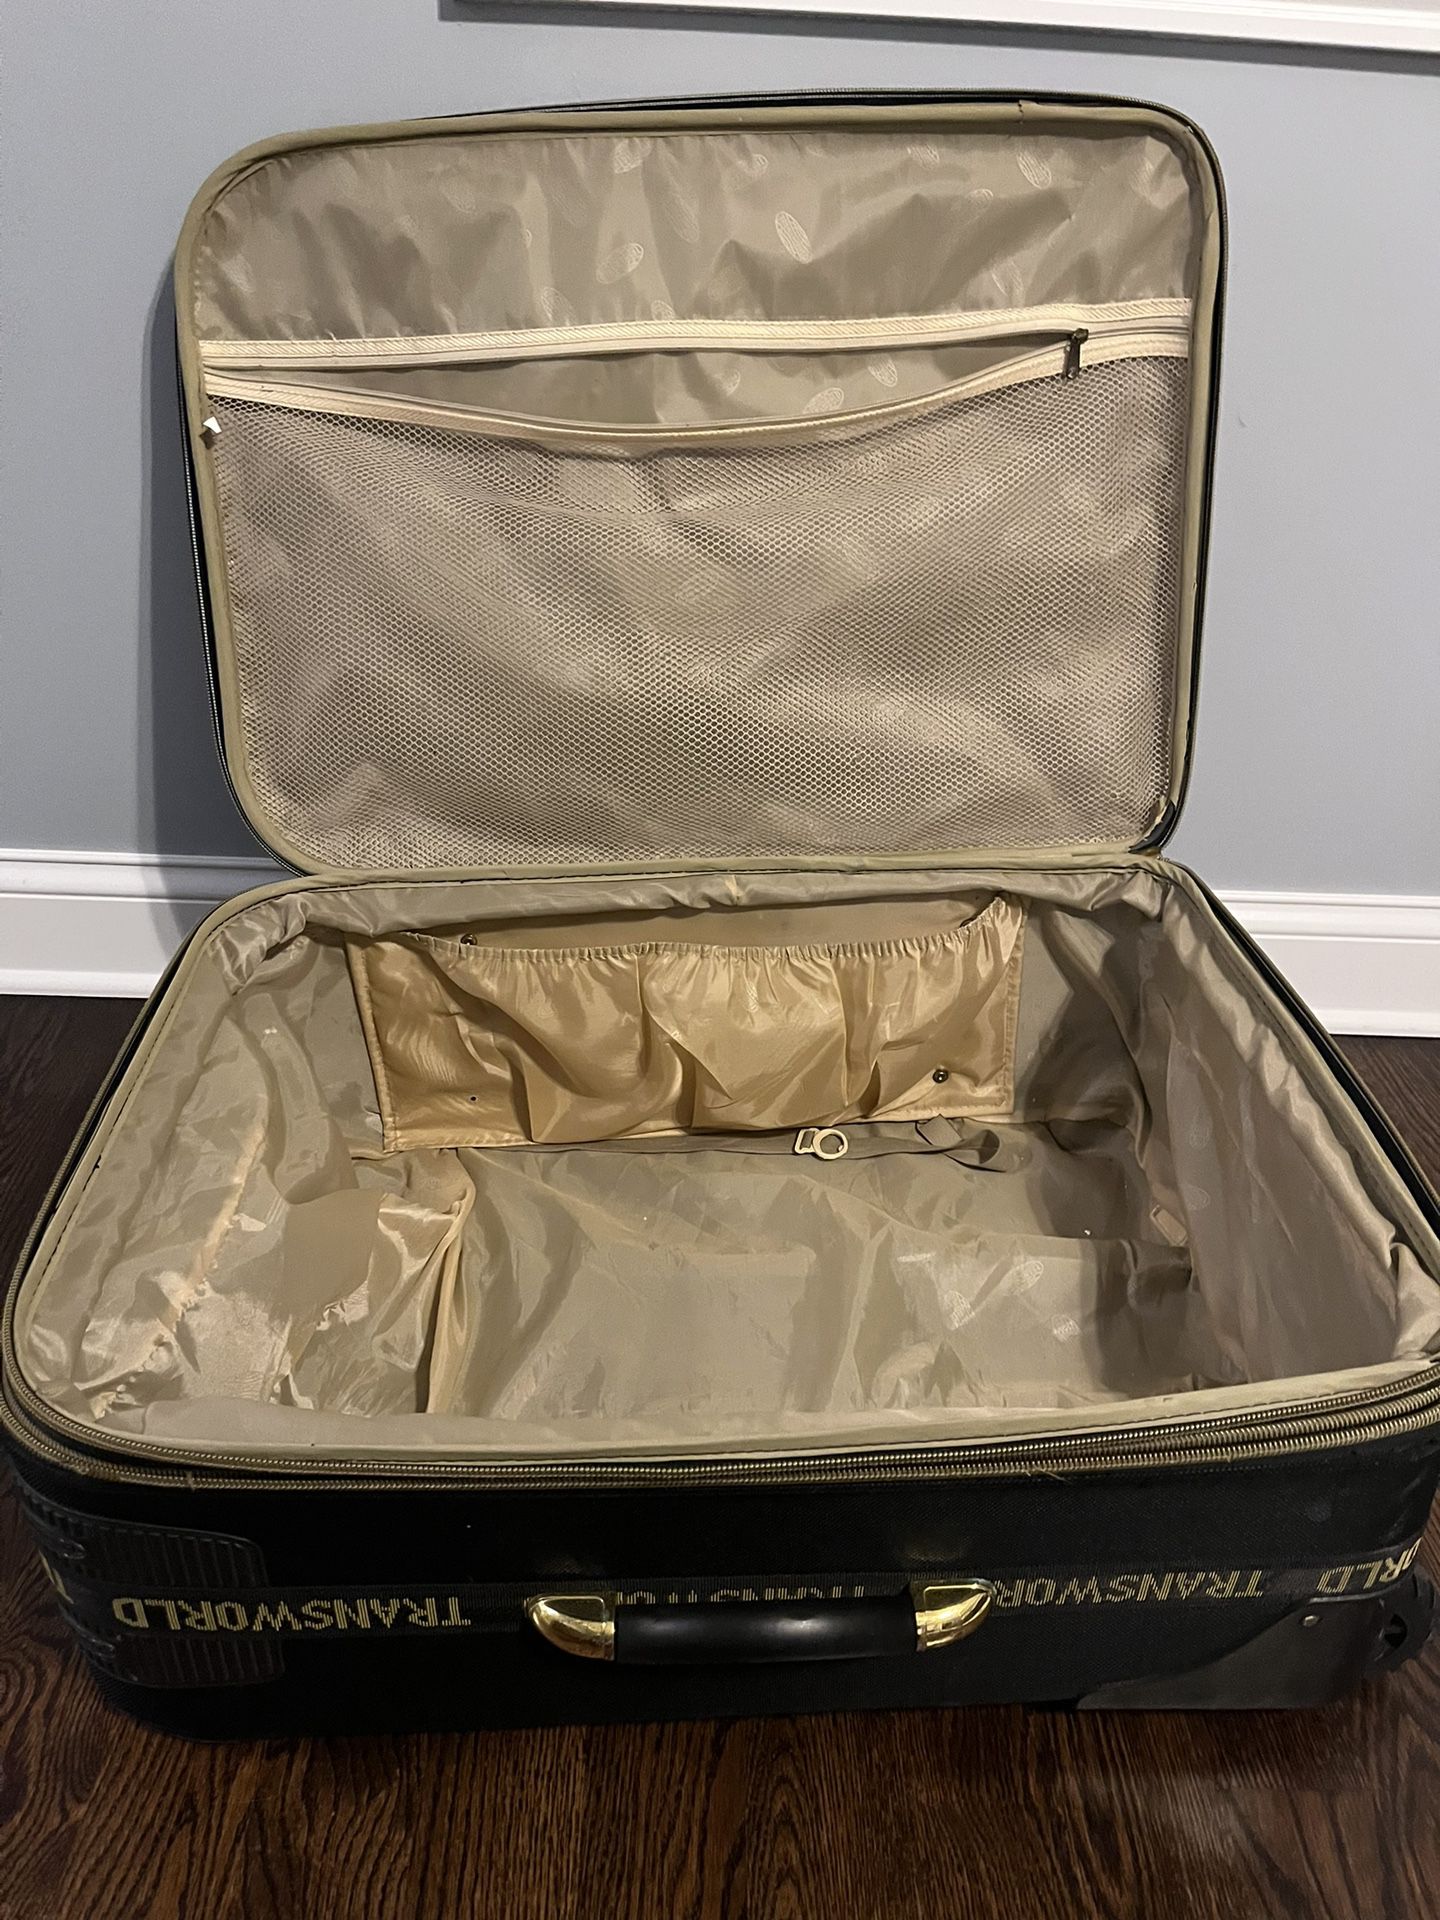 Goyard Trolley Luggage Suitcase for Sale in Lee, NV - OfferUp